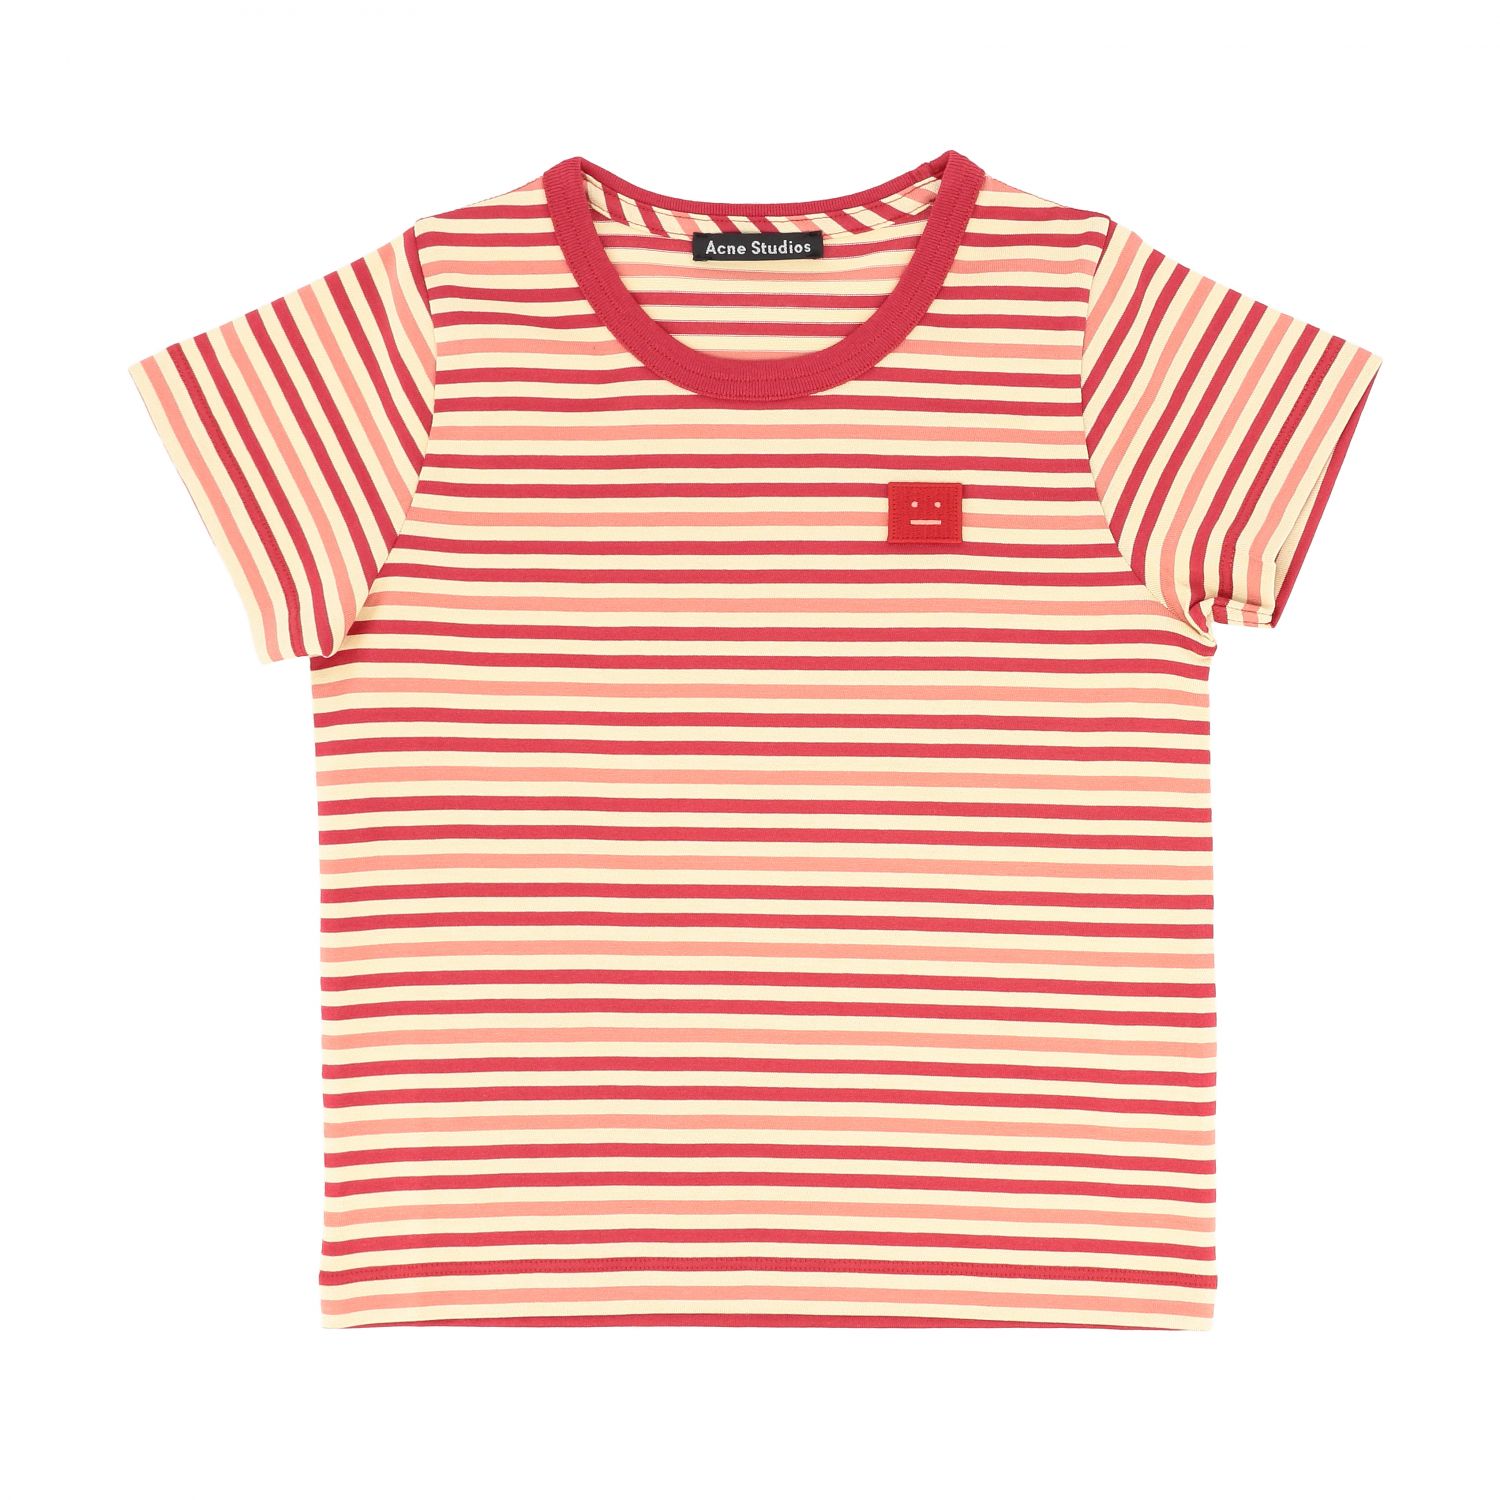 ACNE STUDIOS: short-sleeved T-shirt with striped pattern Red | Acne Studios t-shirt DL0013 online GIGLIO.COM